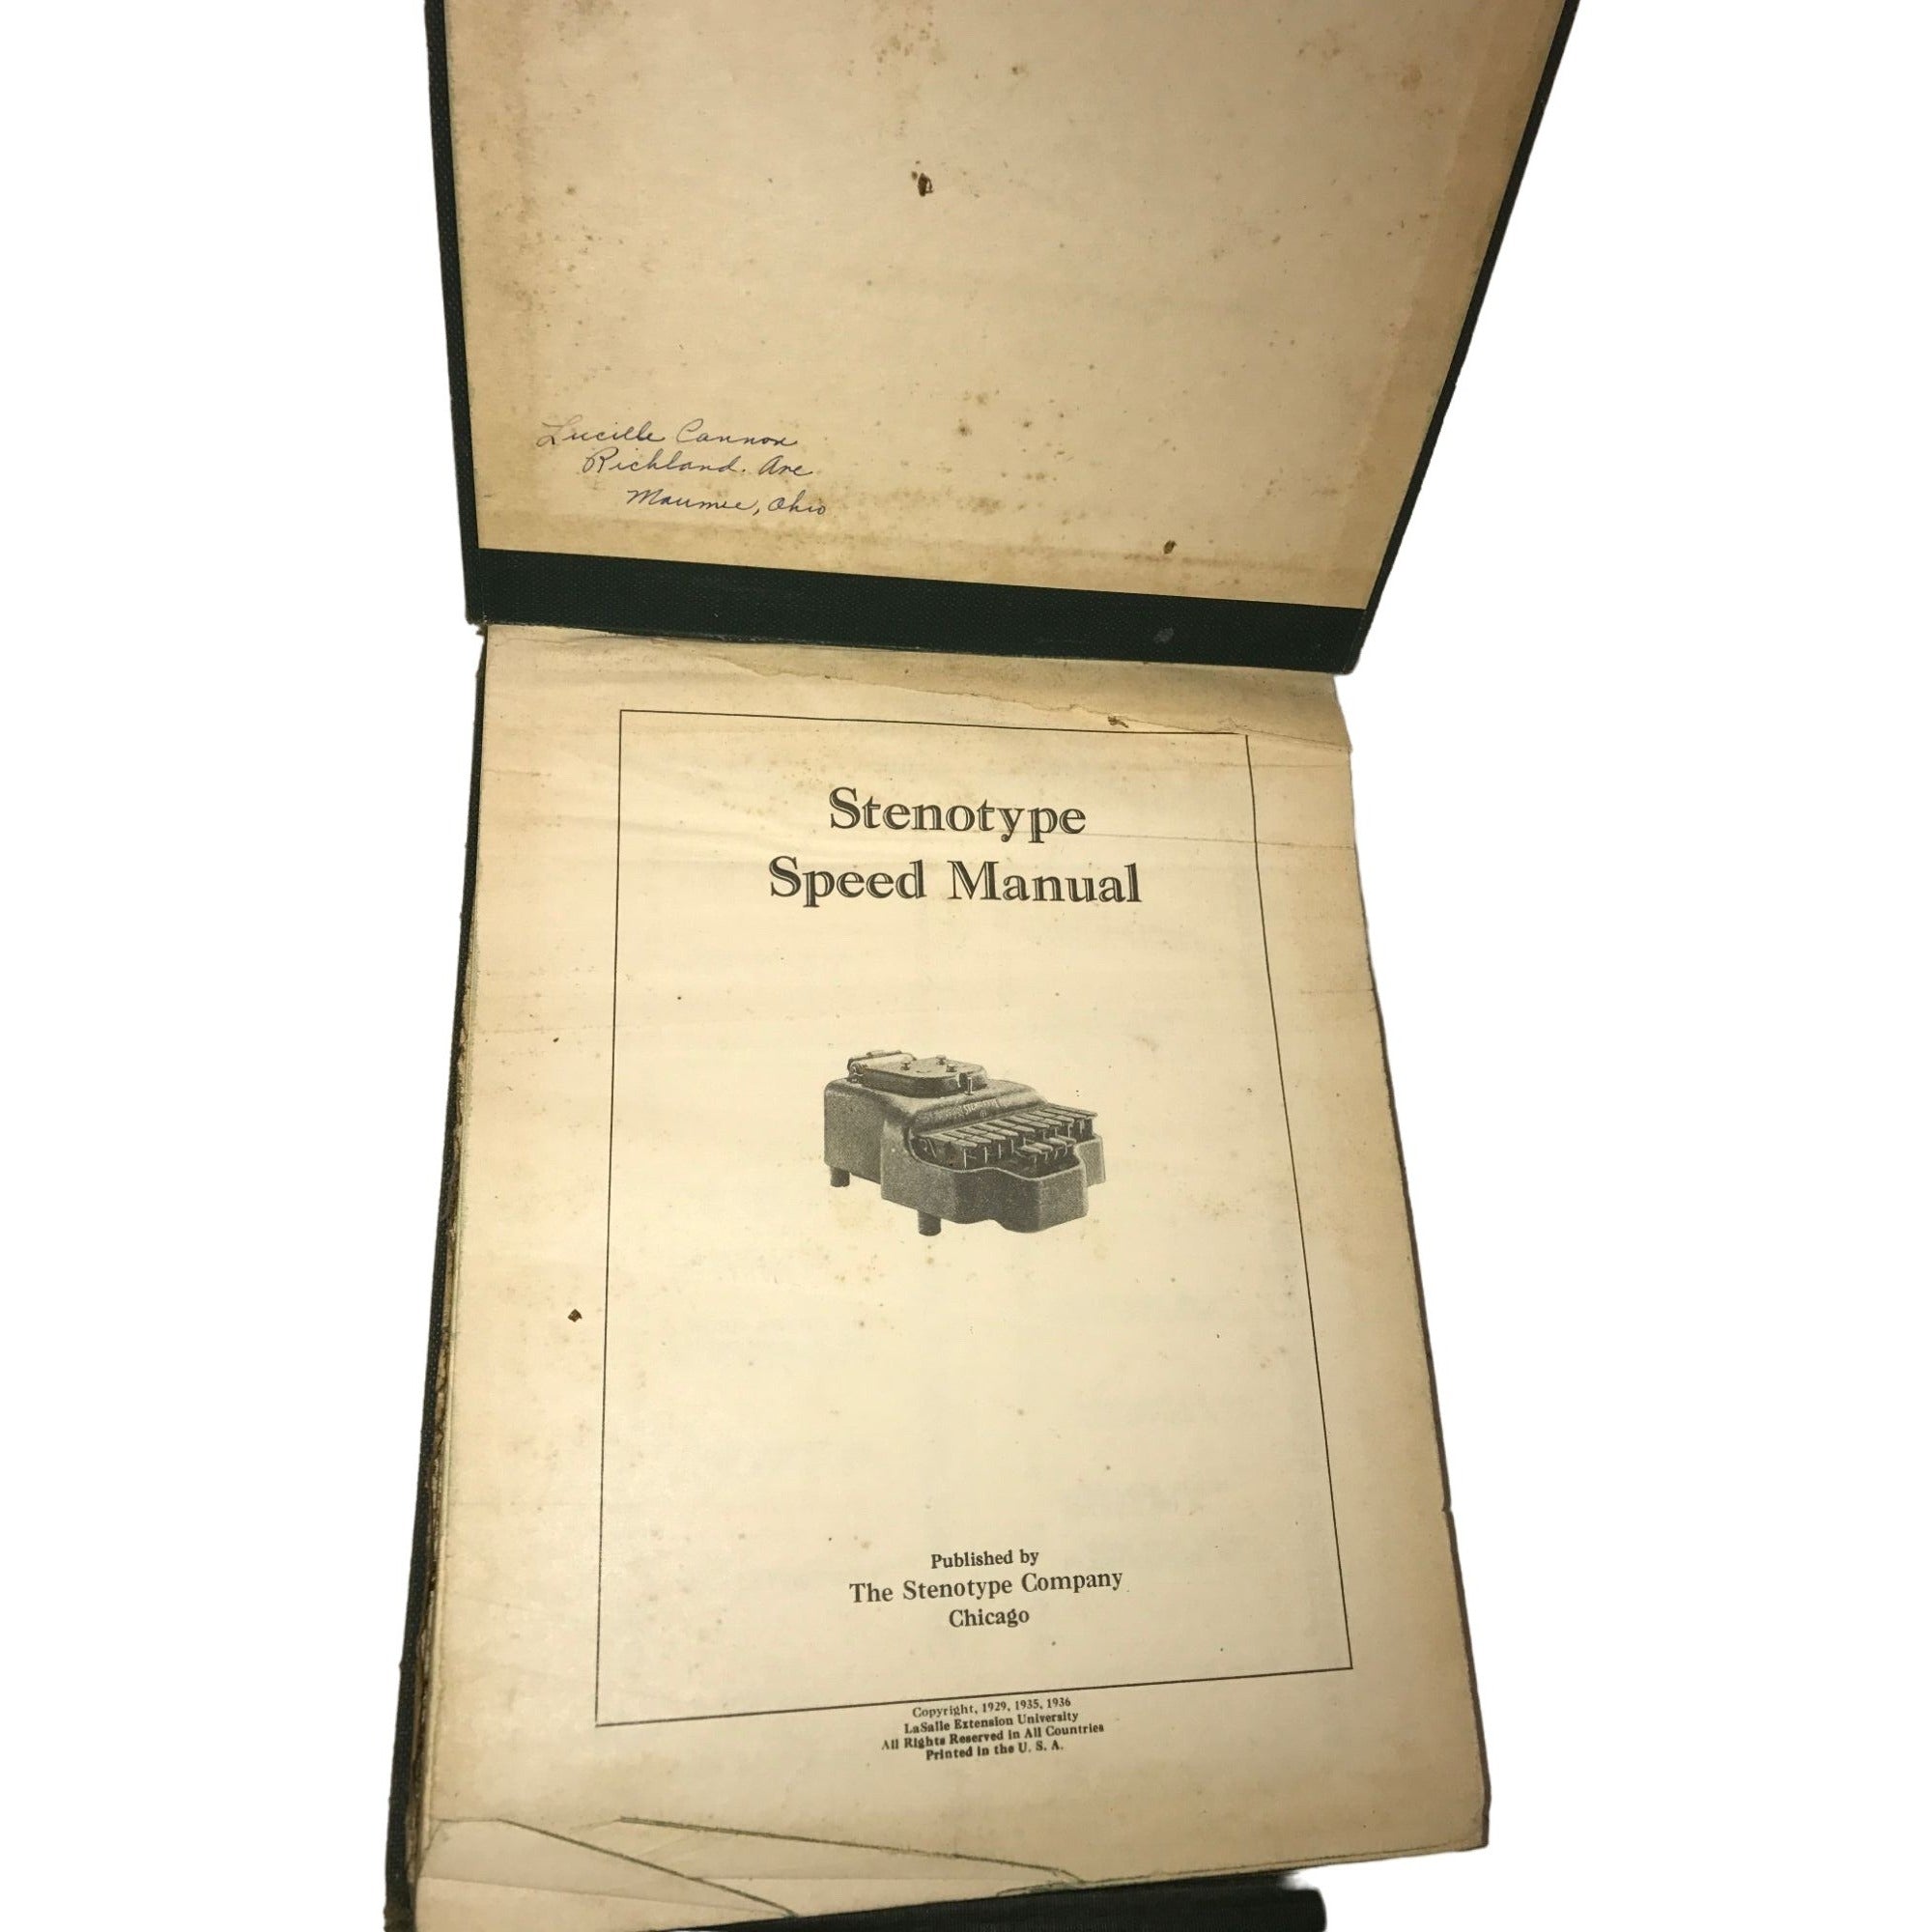 Stenotype Speed Manual 1936 - Vintage typing textbook- Published by The Stenotype Company